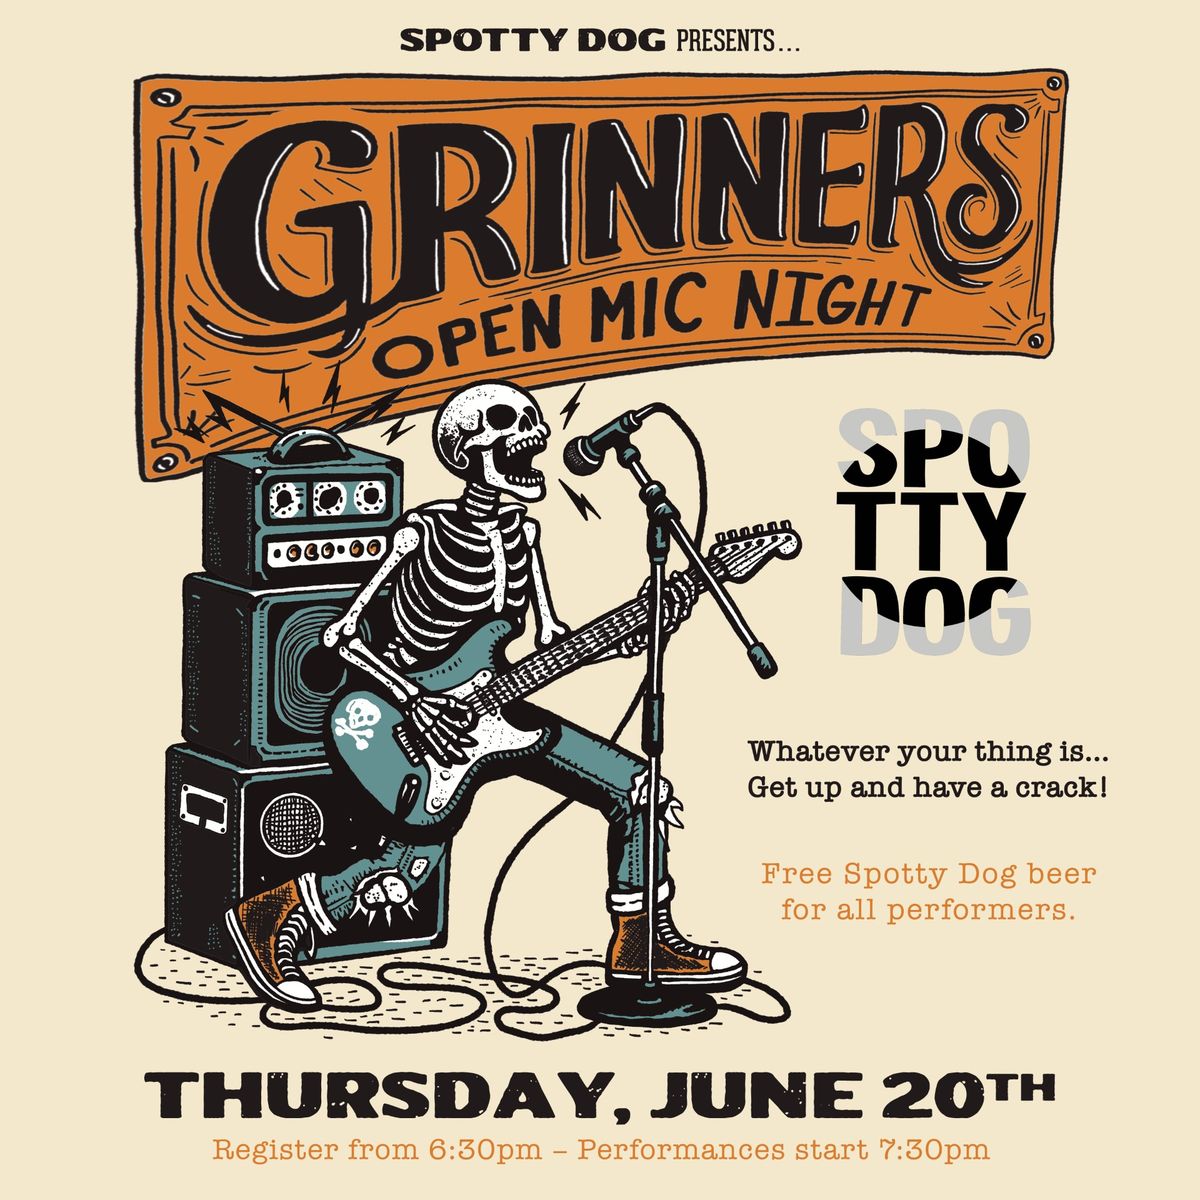 Grinners Open Mic Night